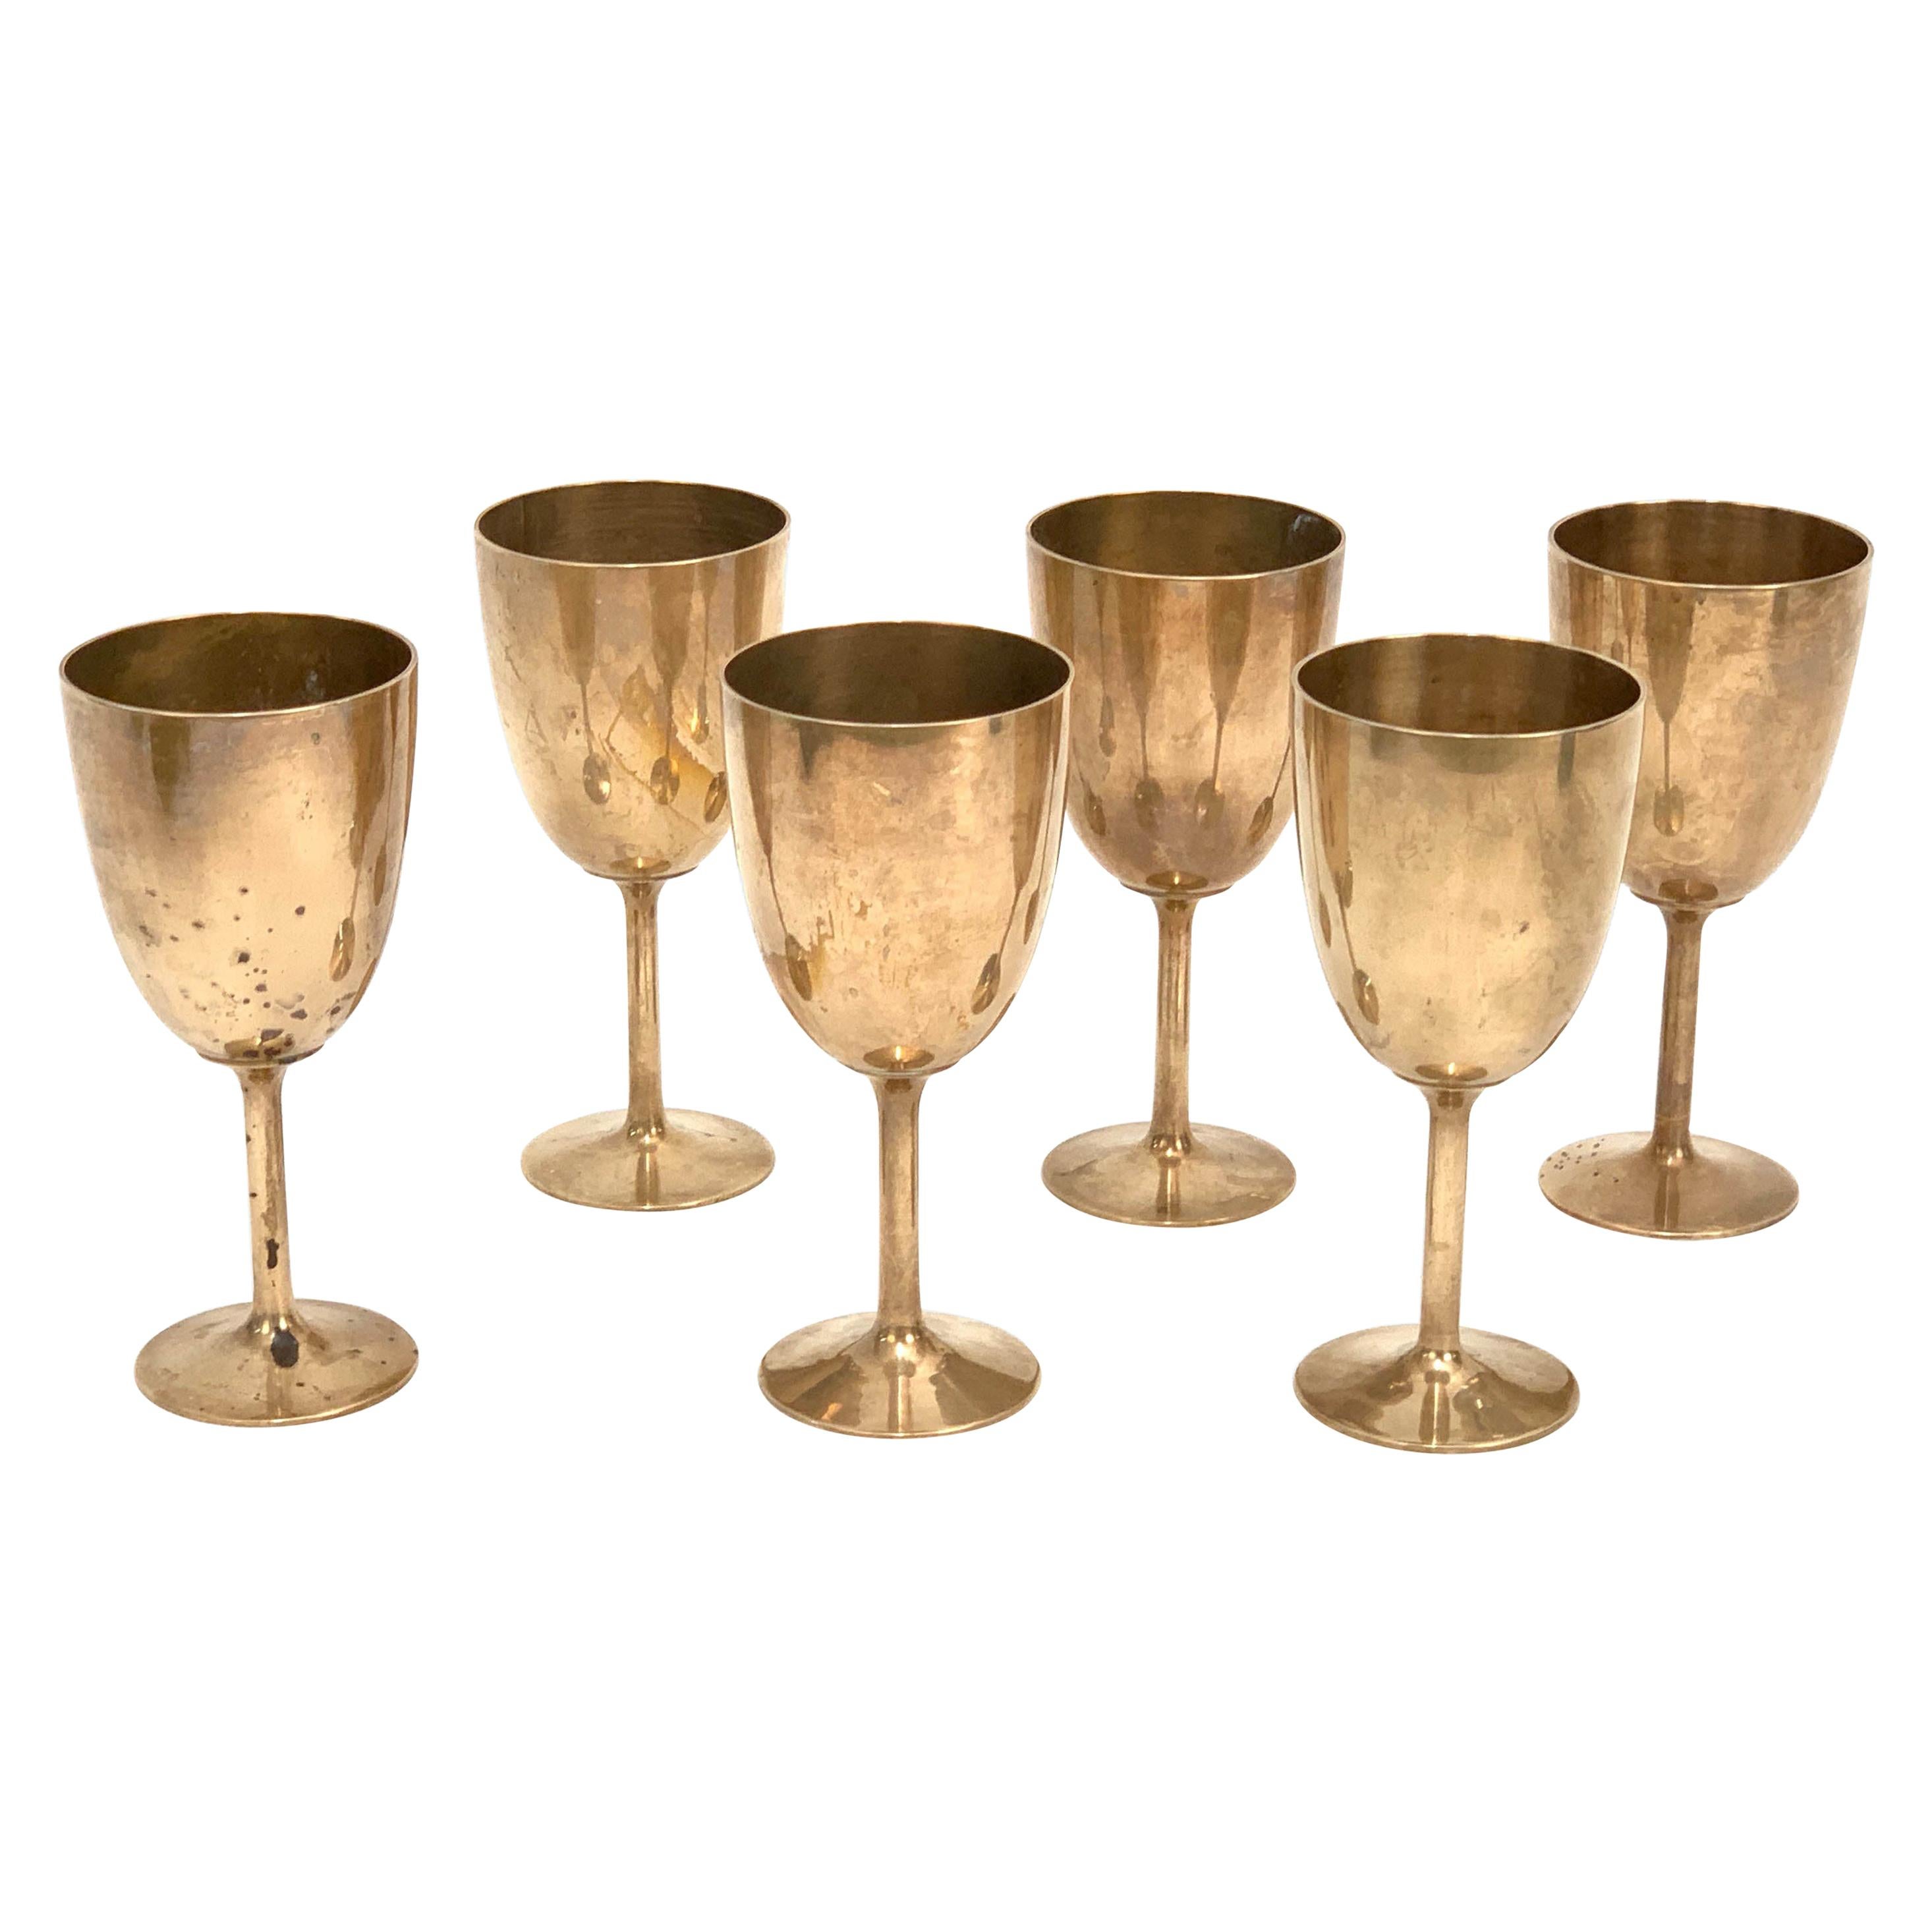 Midcentury Italian Regency Solid Brass Chalices, 1980s For Sale